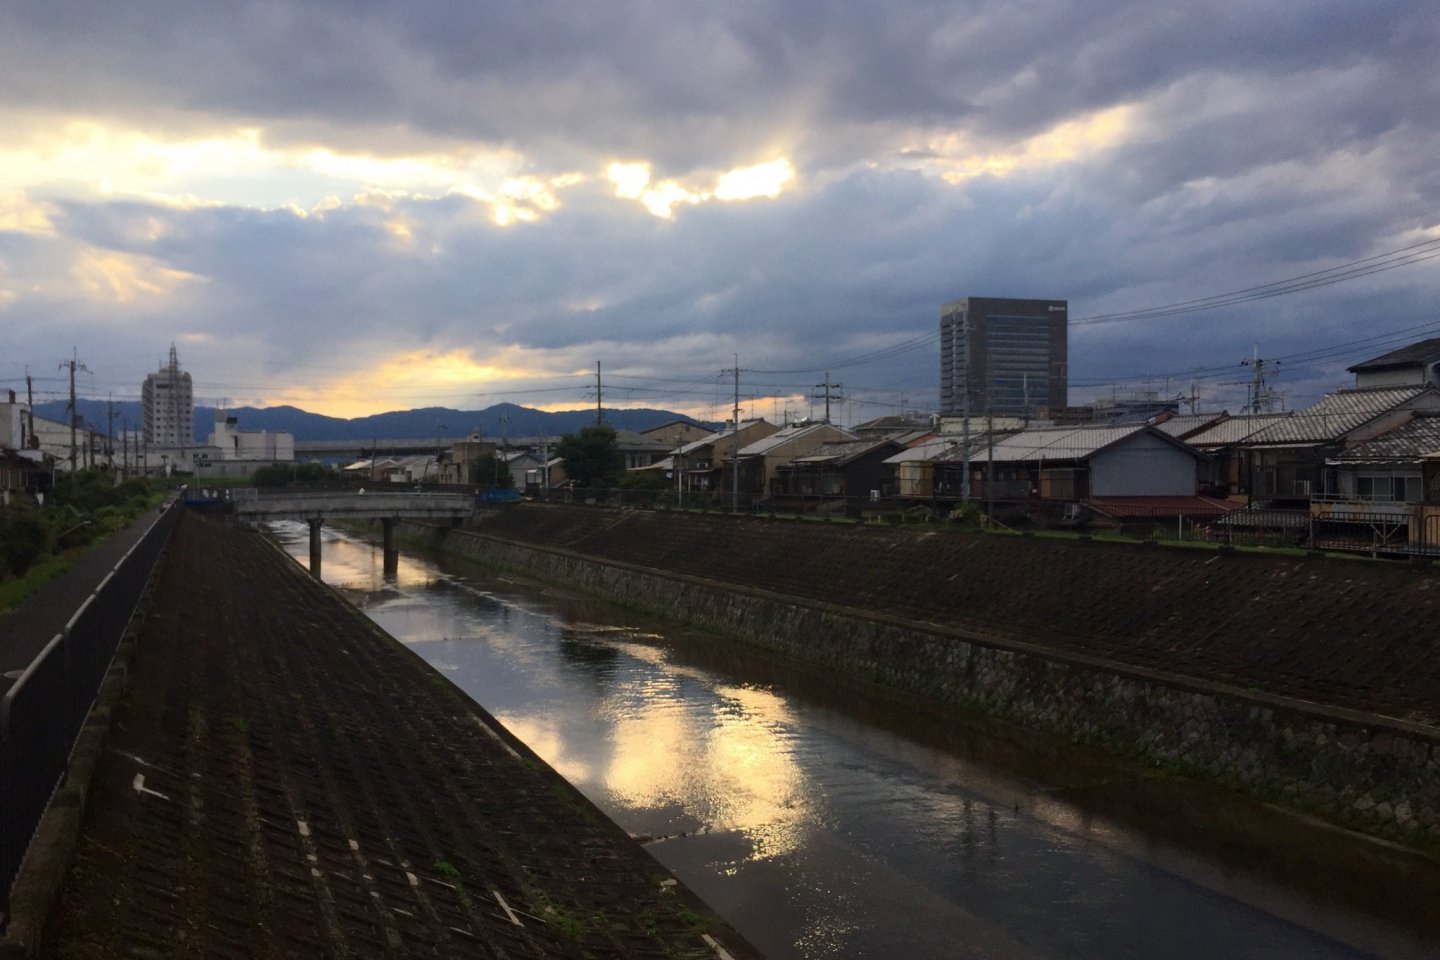 Right before the storm in Fushimi